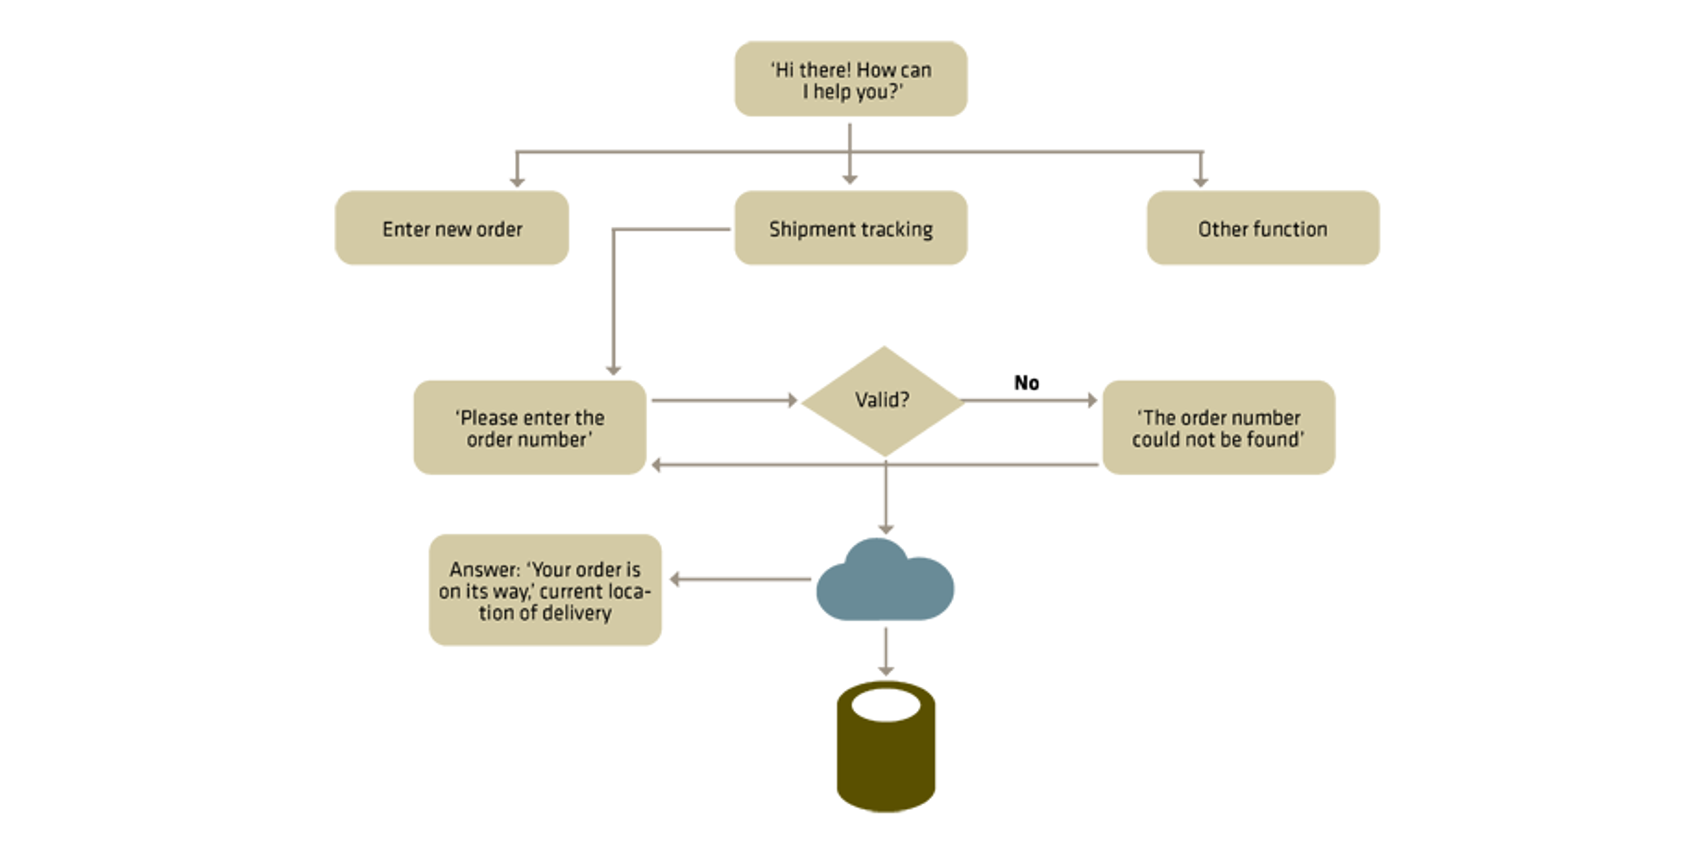 Question tree for the ‘shipment tracking’ process